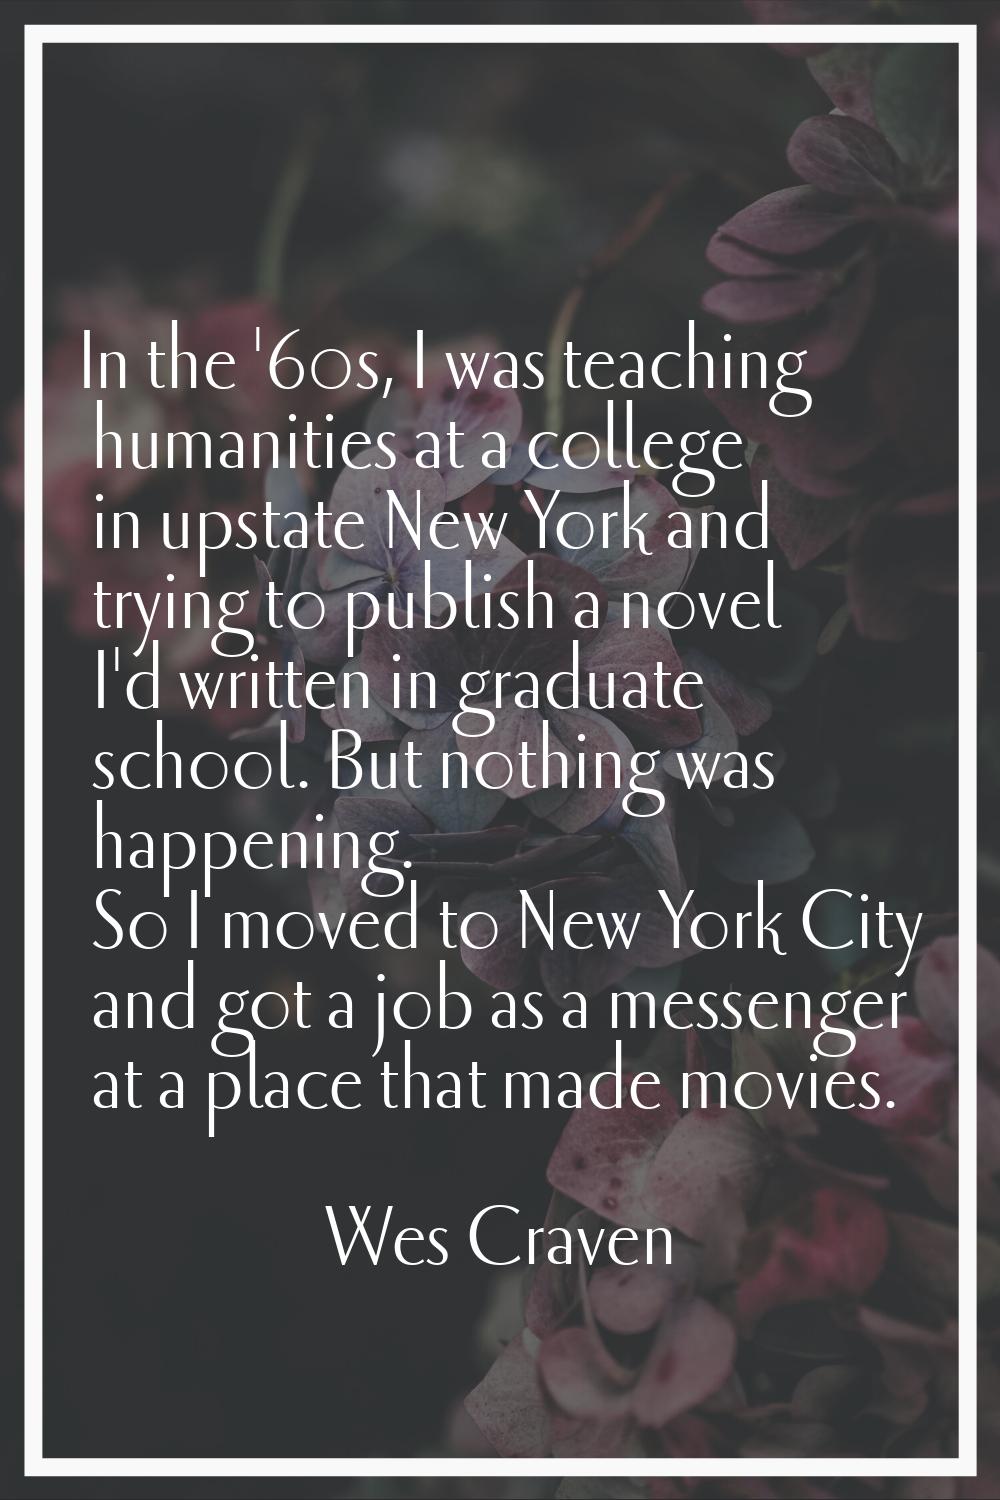 In the '60s, I was teaching humanities at a college in upstate New York and trying to publish a nov